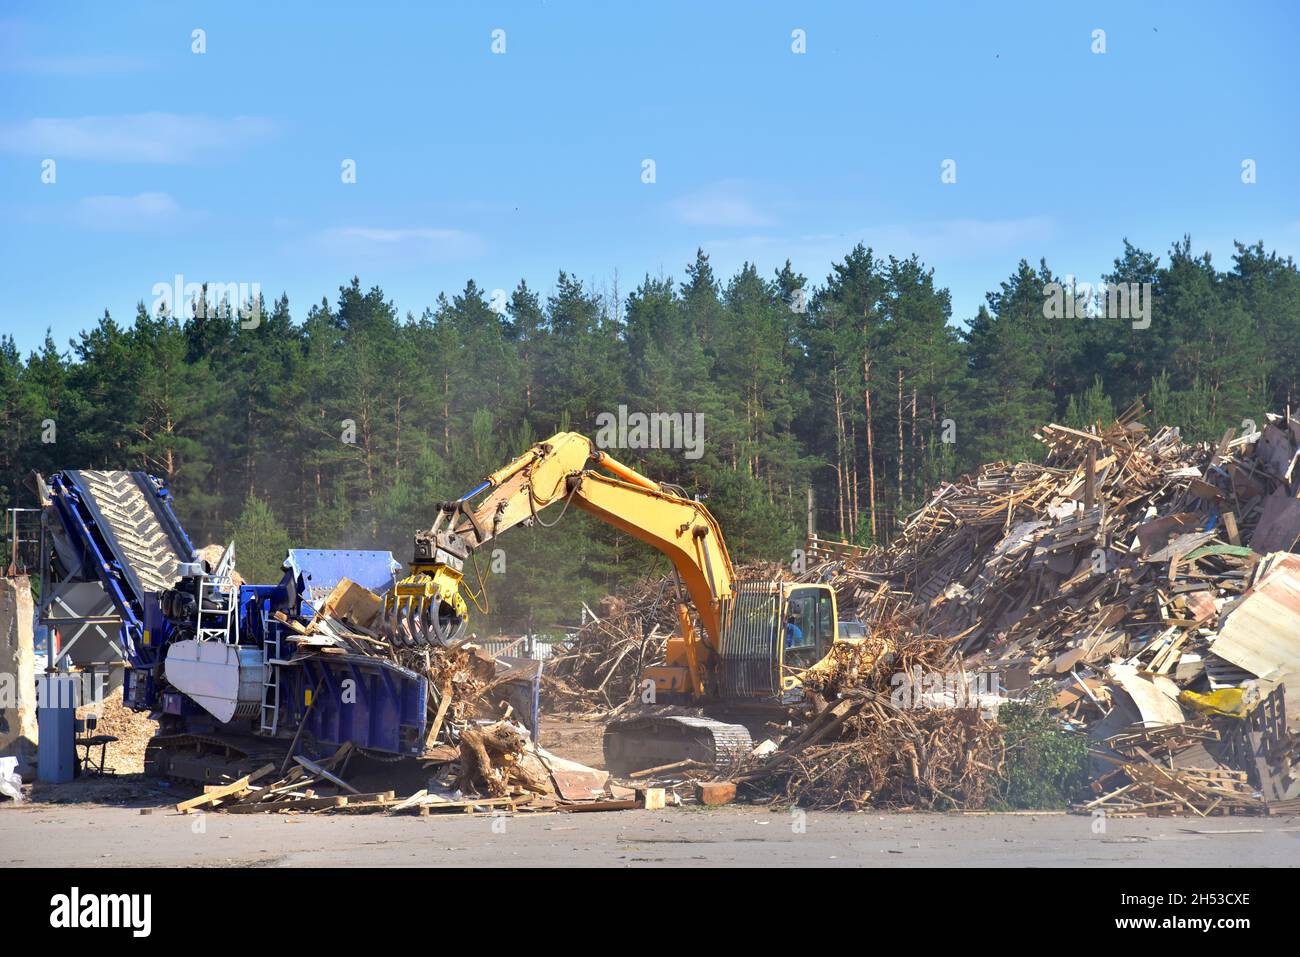 Excavator with log grab crane loads round logs in woodchipper. Mobile chipper for wood chipping. Grab loads timber for lumber mill. Horizontal Grinder Stock Photo